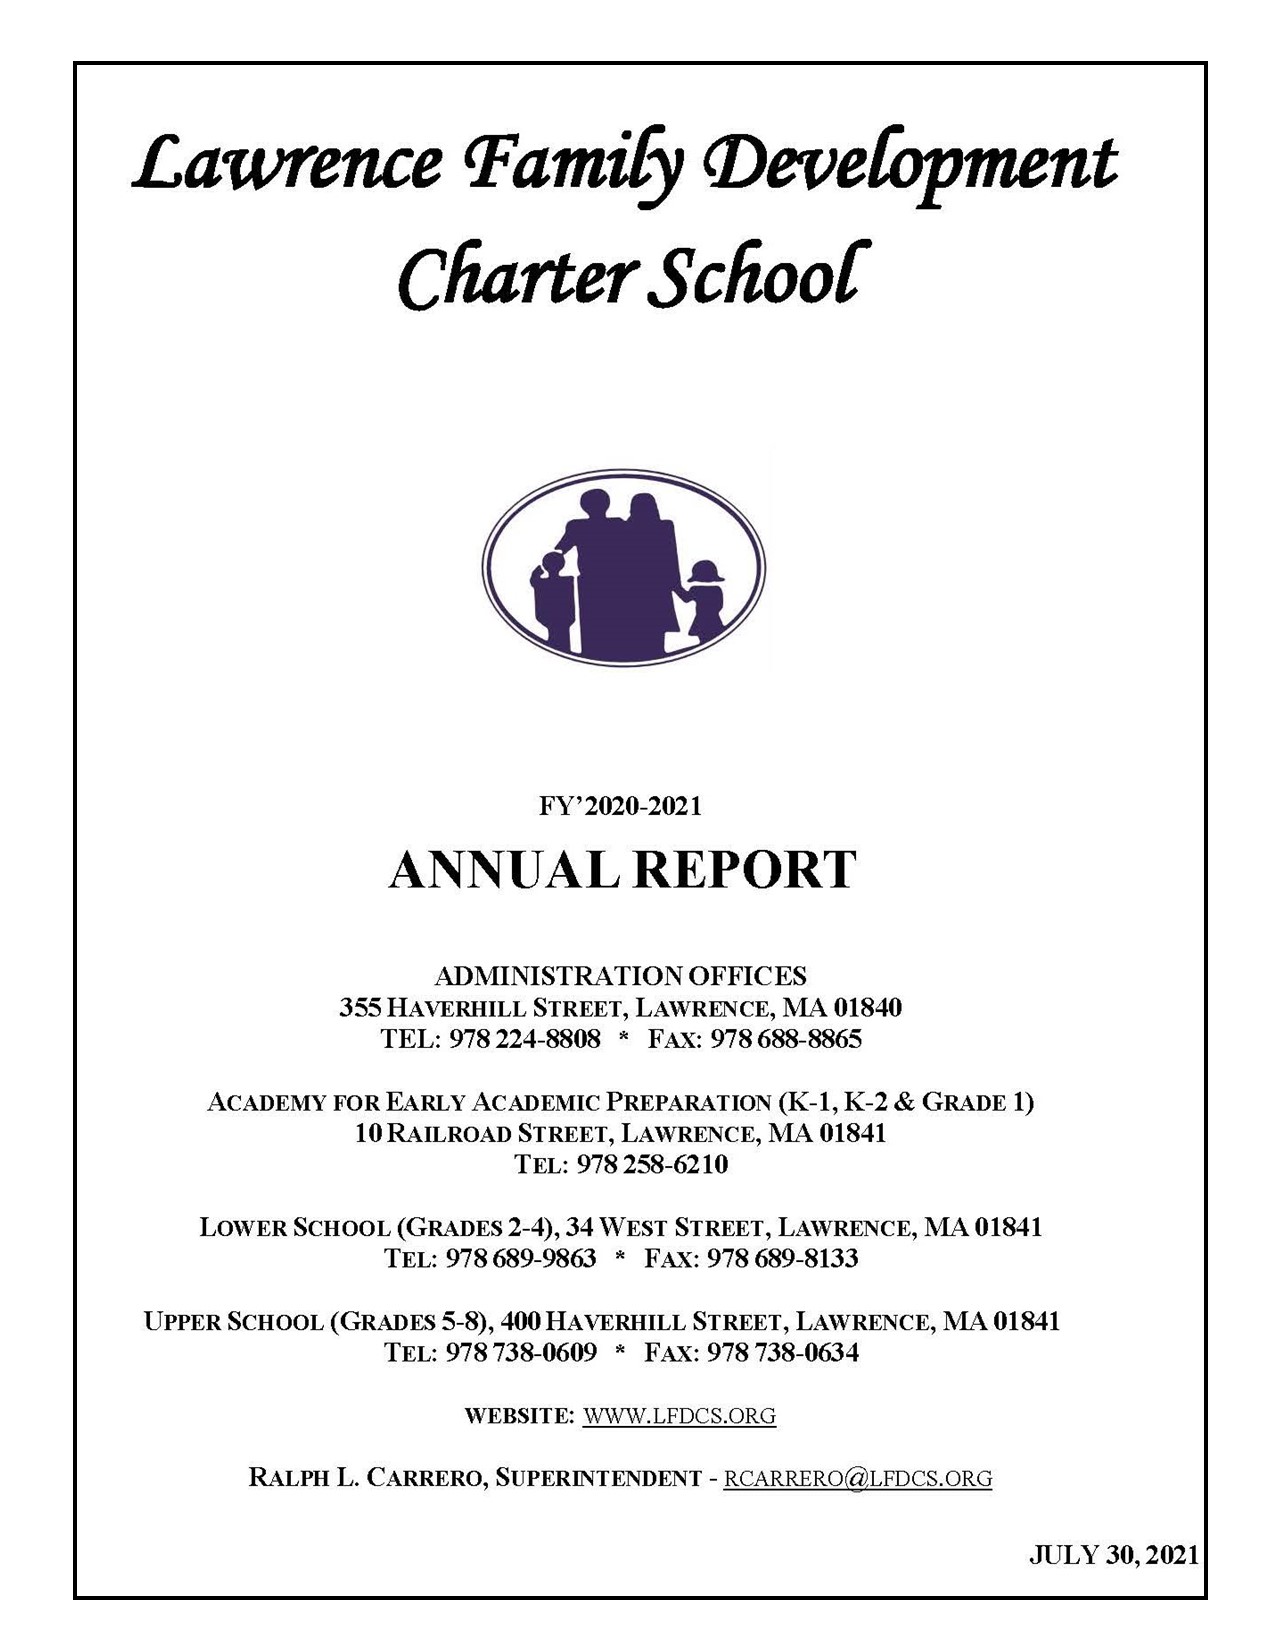 Annual Report Cover page